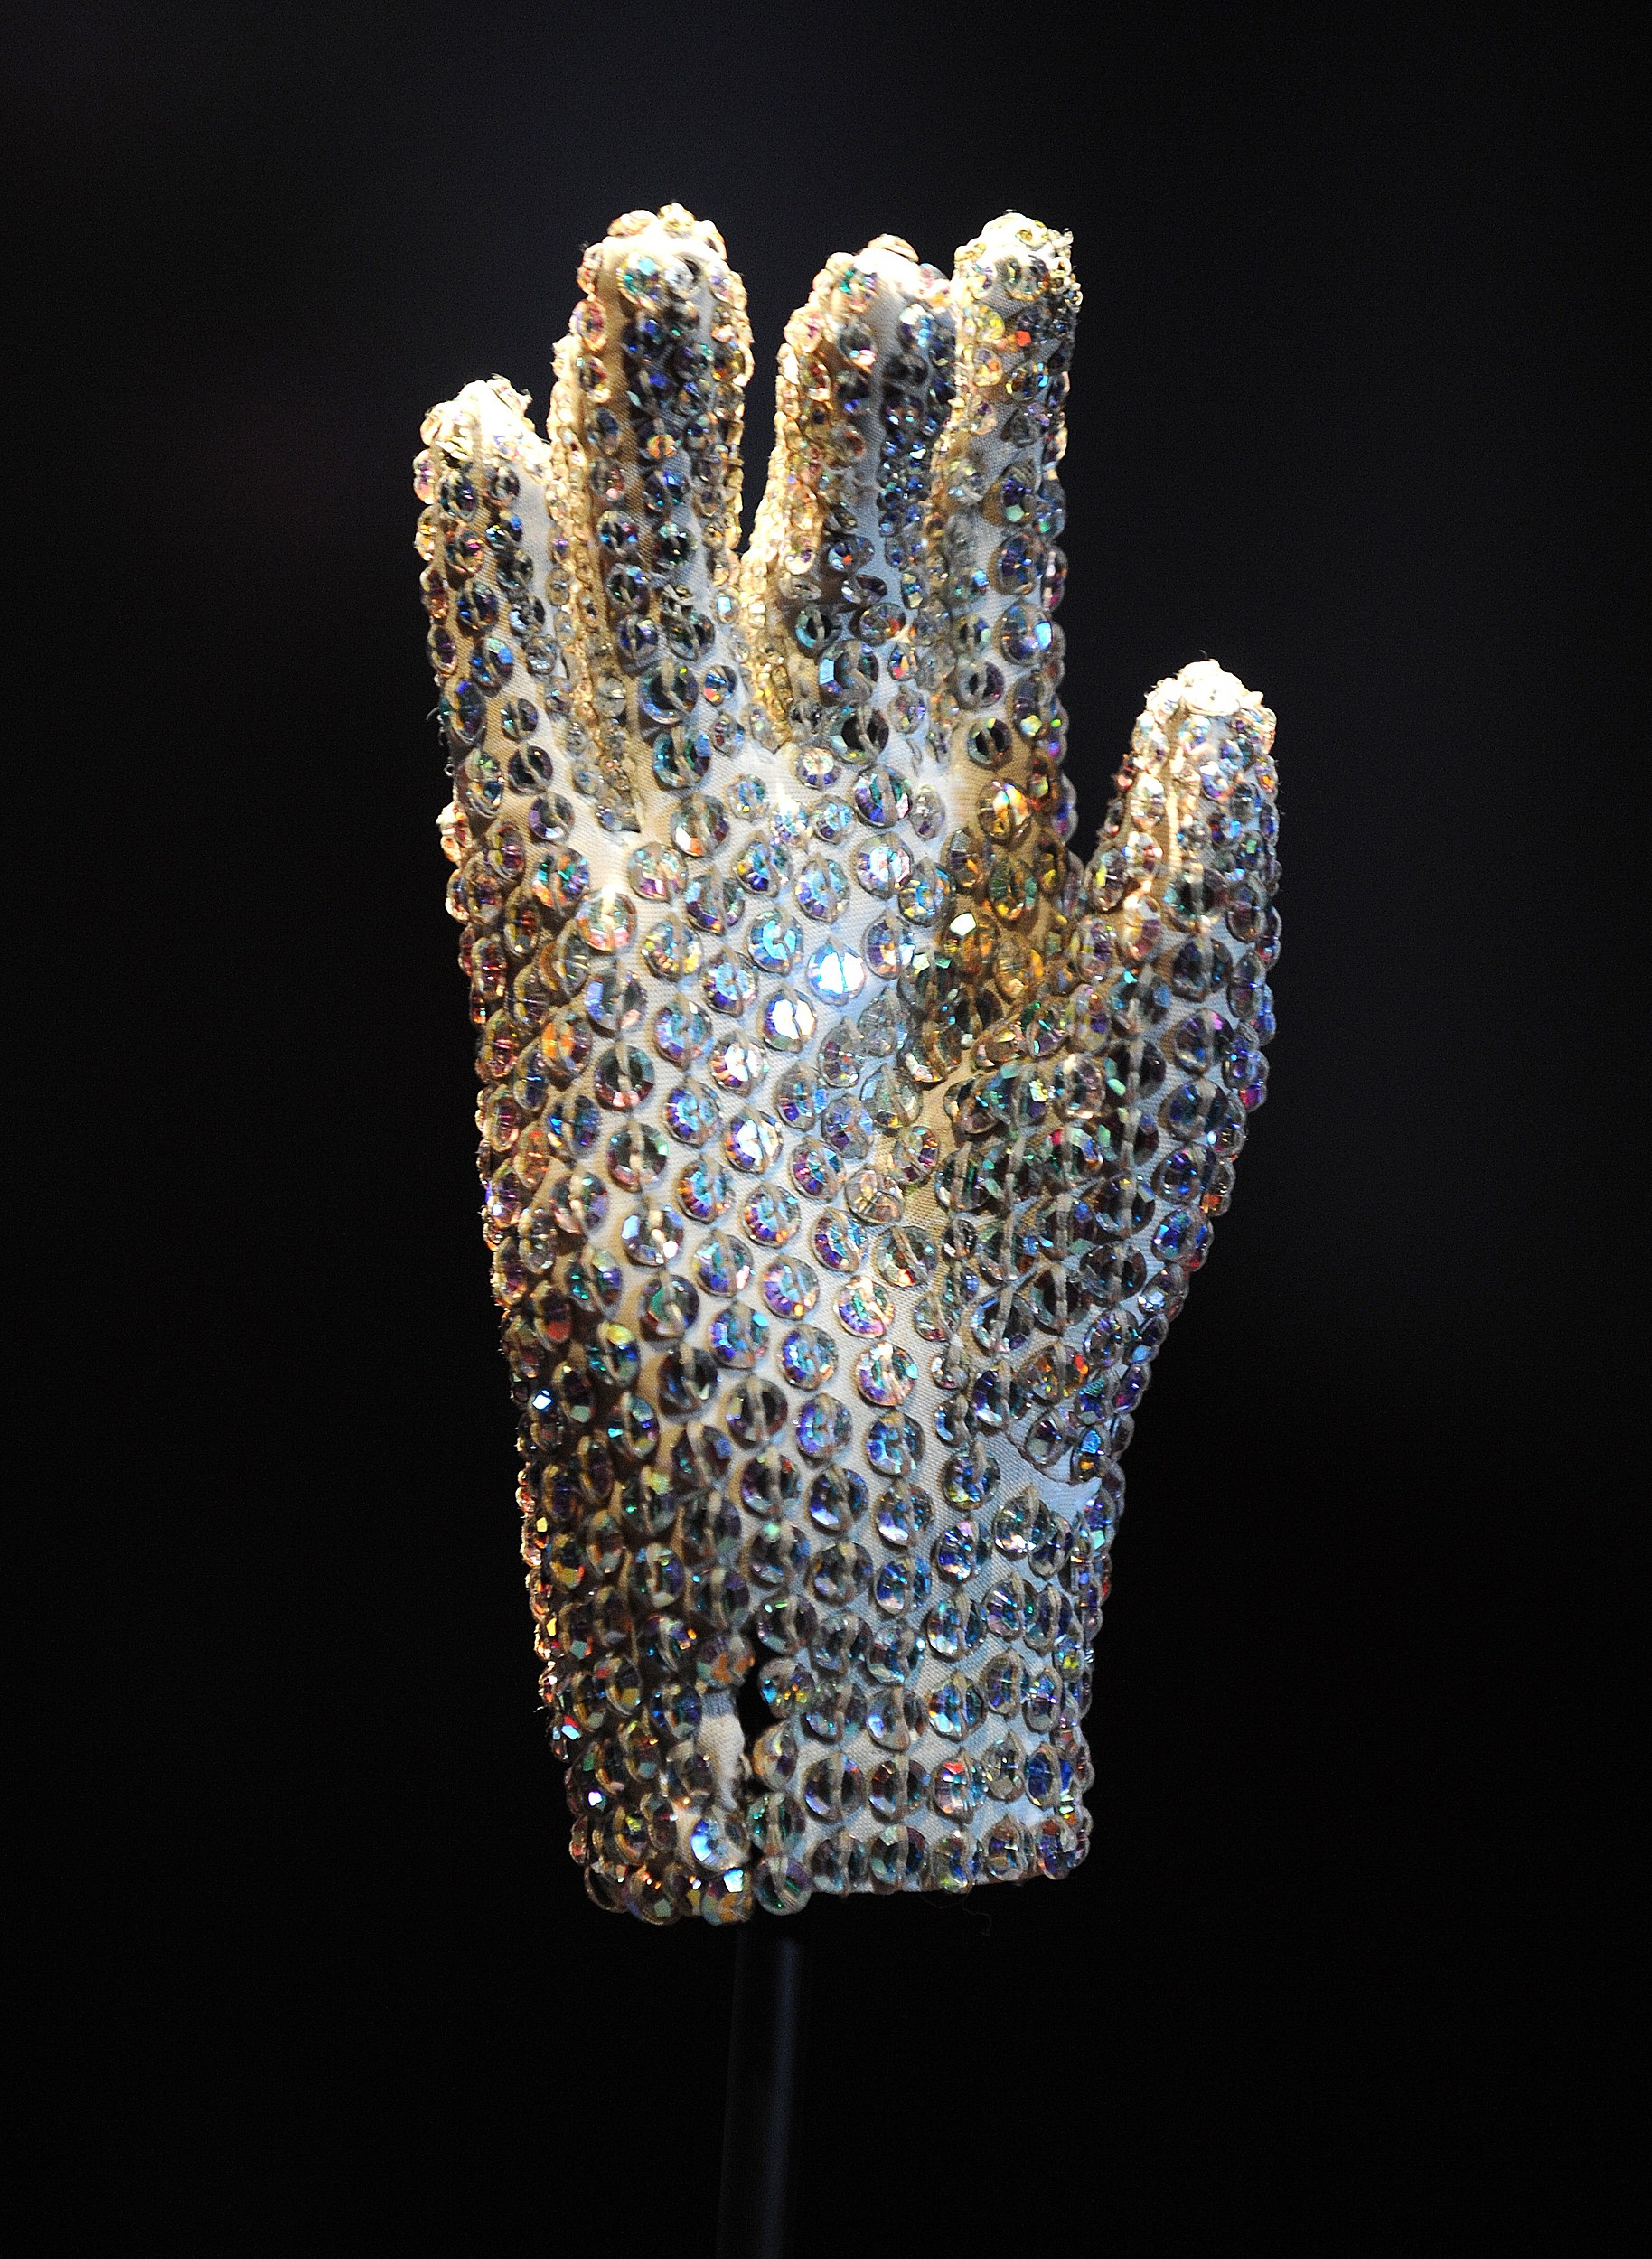 Michael Jackson's iconic white glove is sold at auction for £85,000